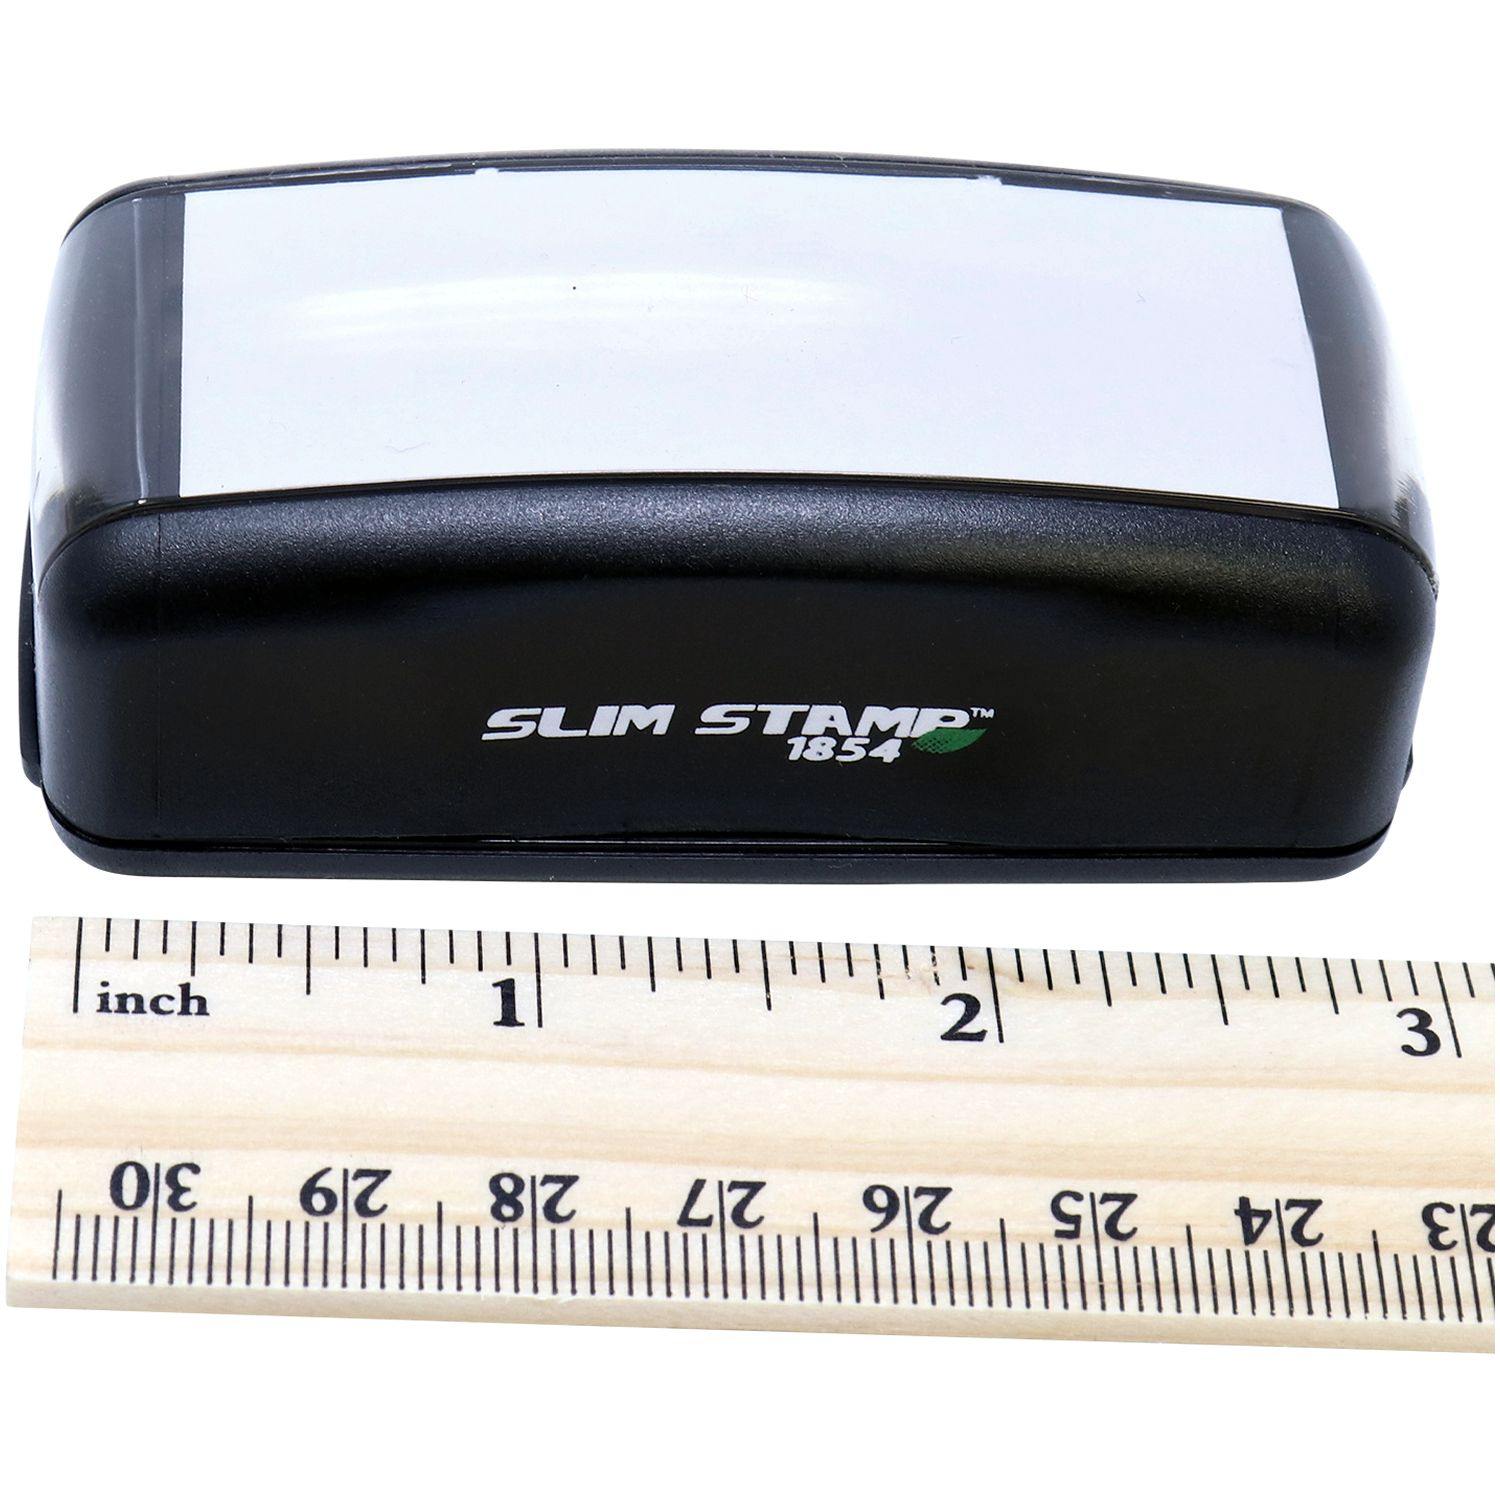 Measurement Large Pre-Inked Bold Covid-19 Stamp with Ruler